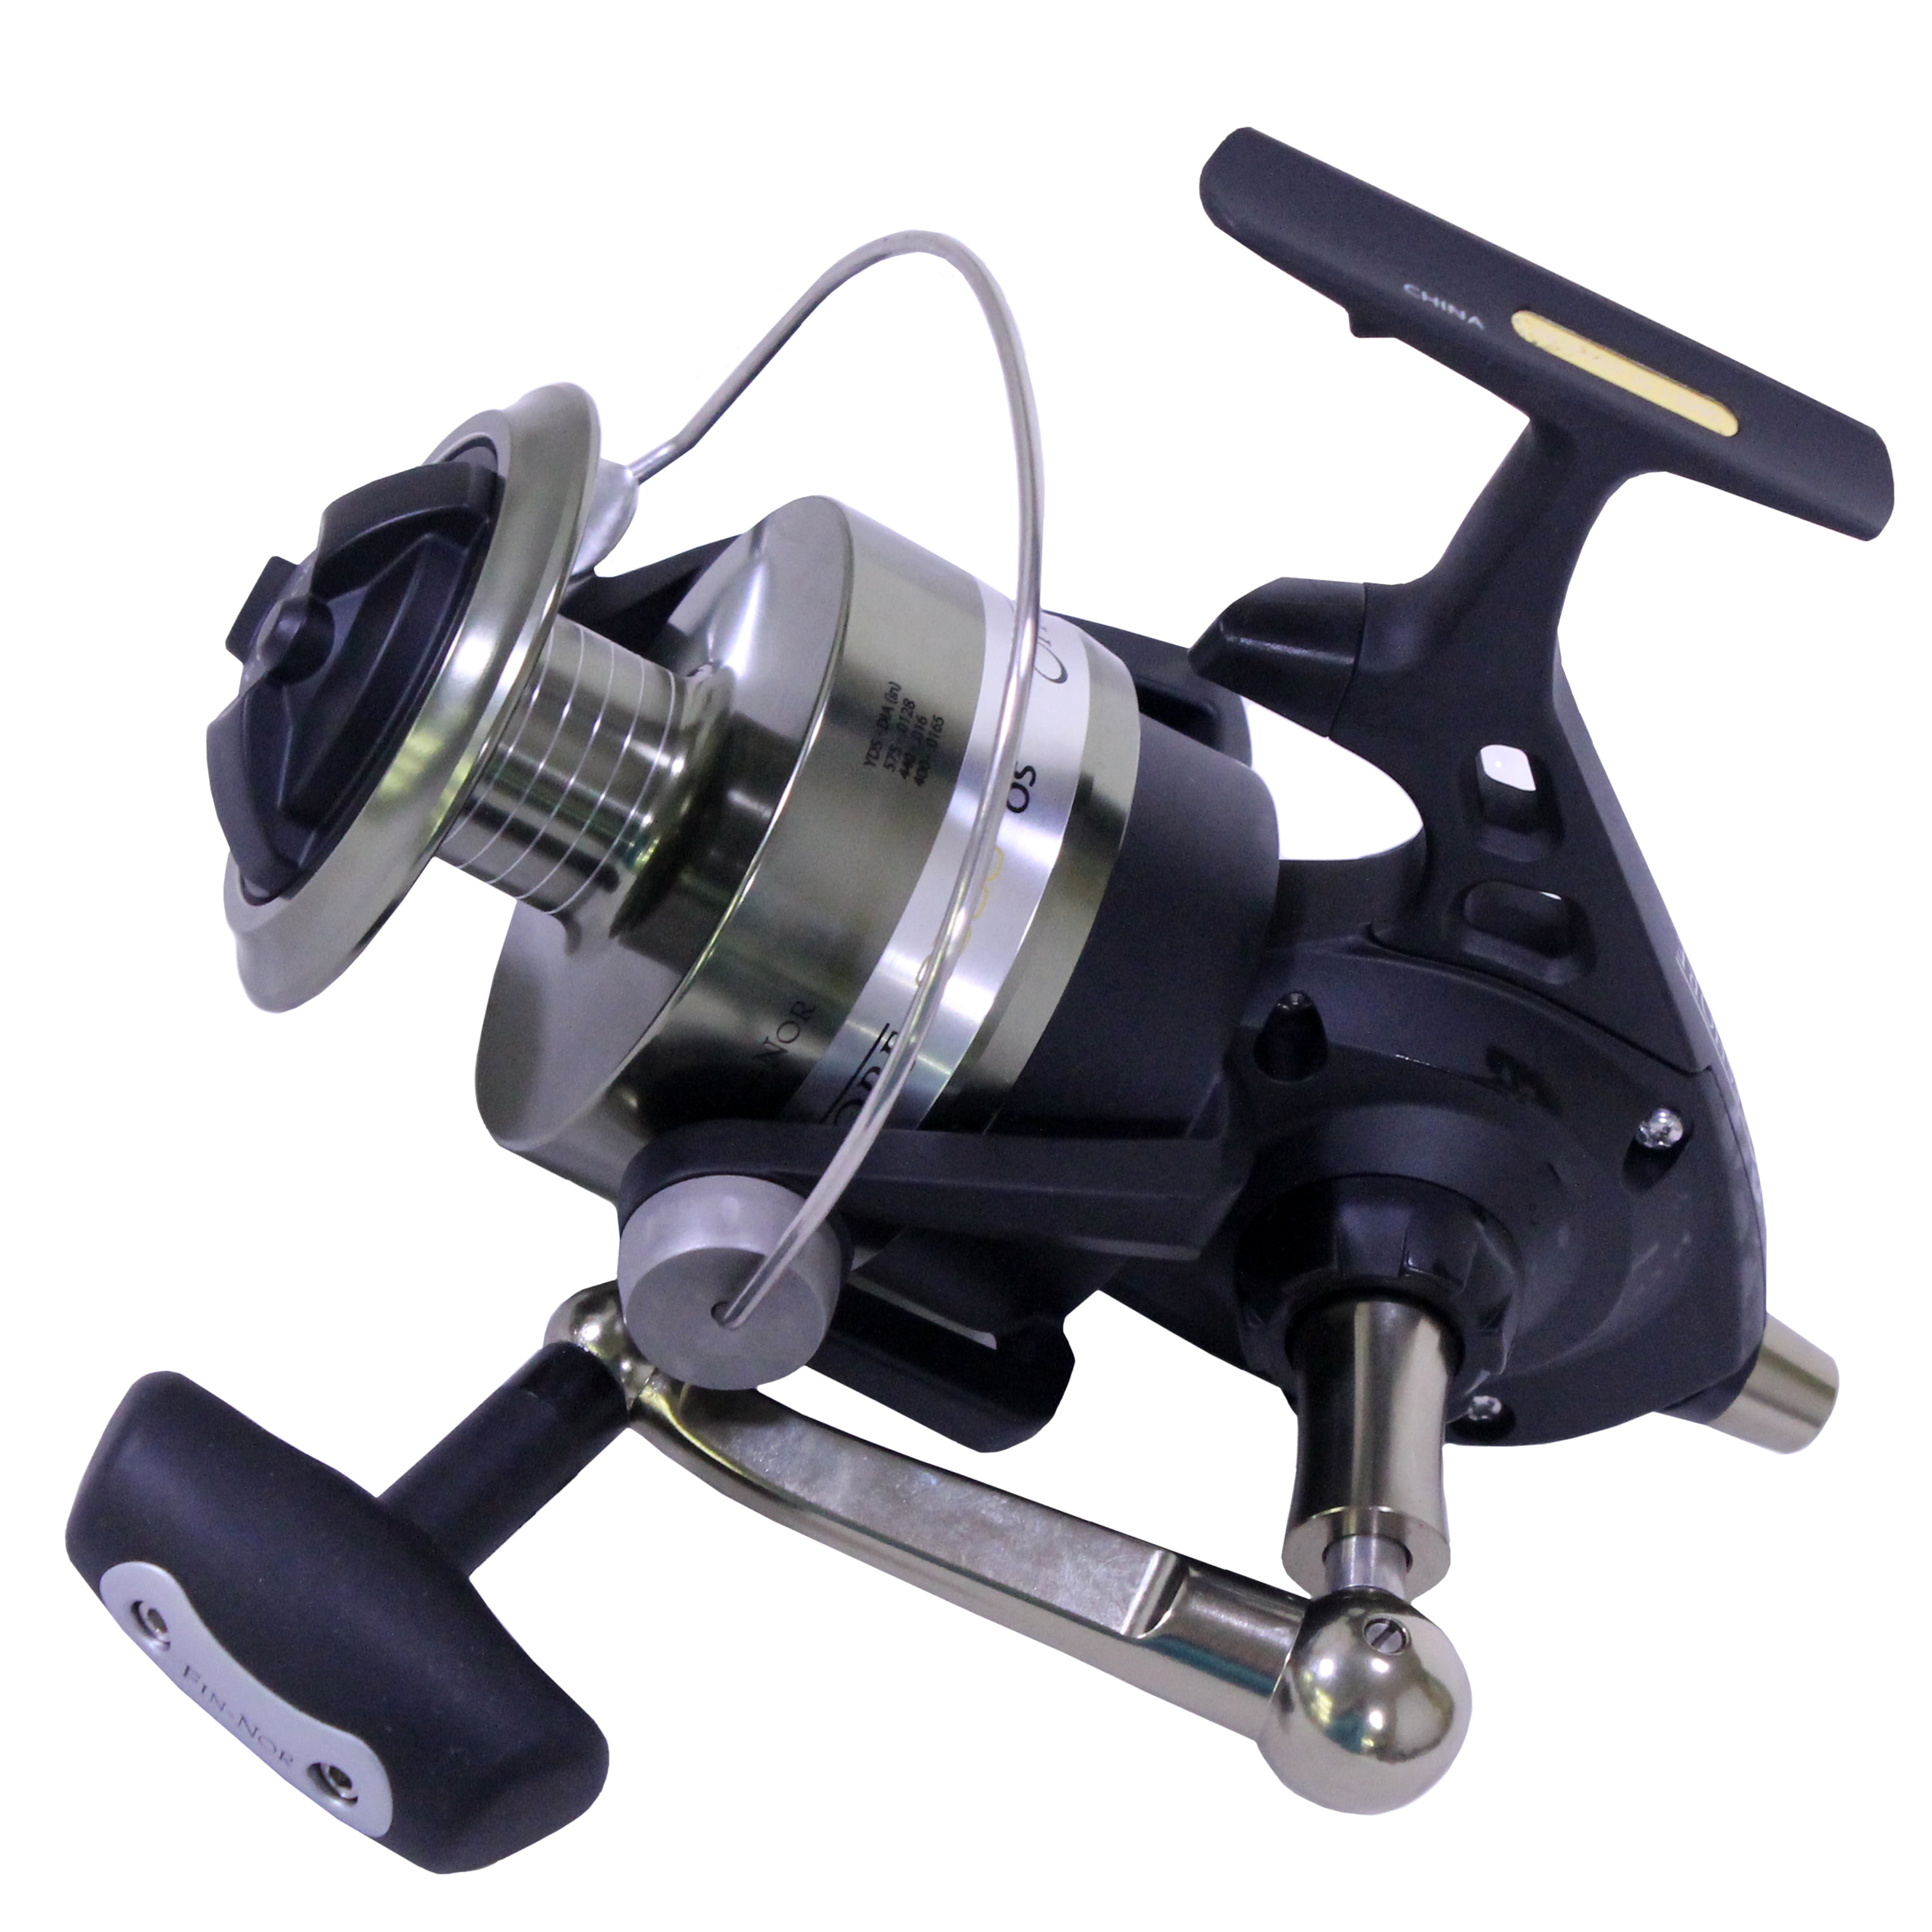 Fin-Nor Off Shore Spinning Reel OFS6500 400 yards Palestine